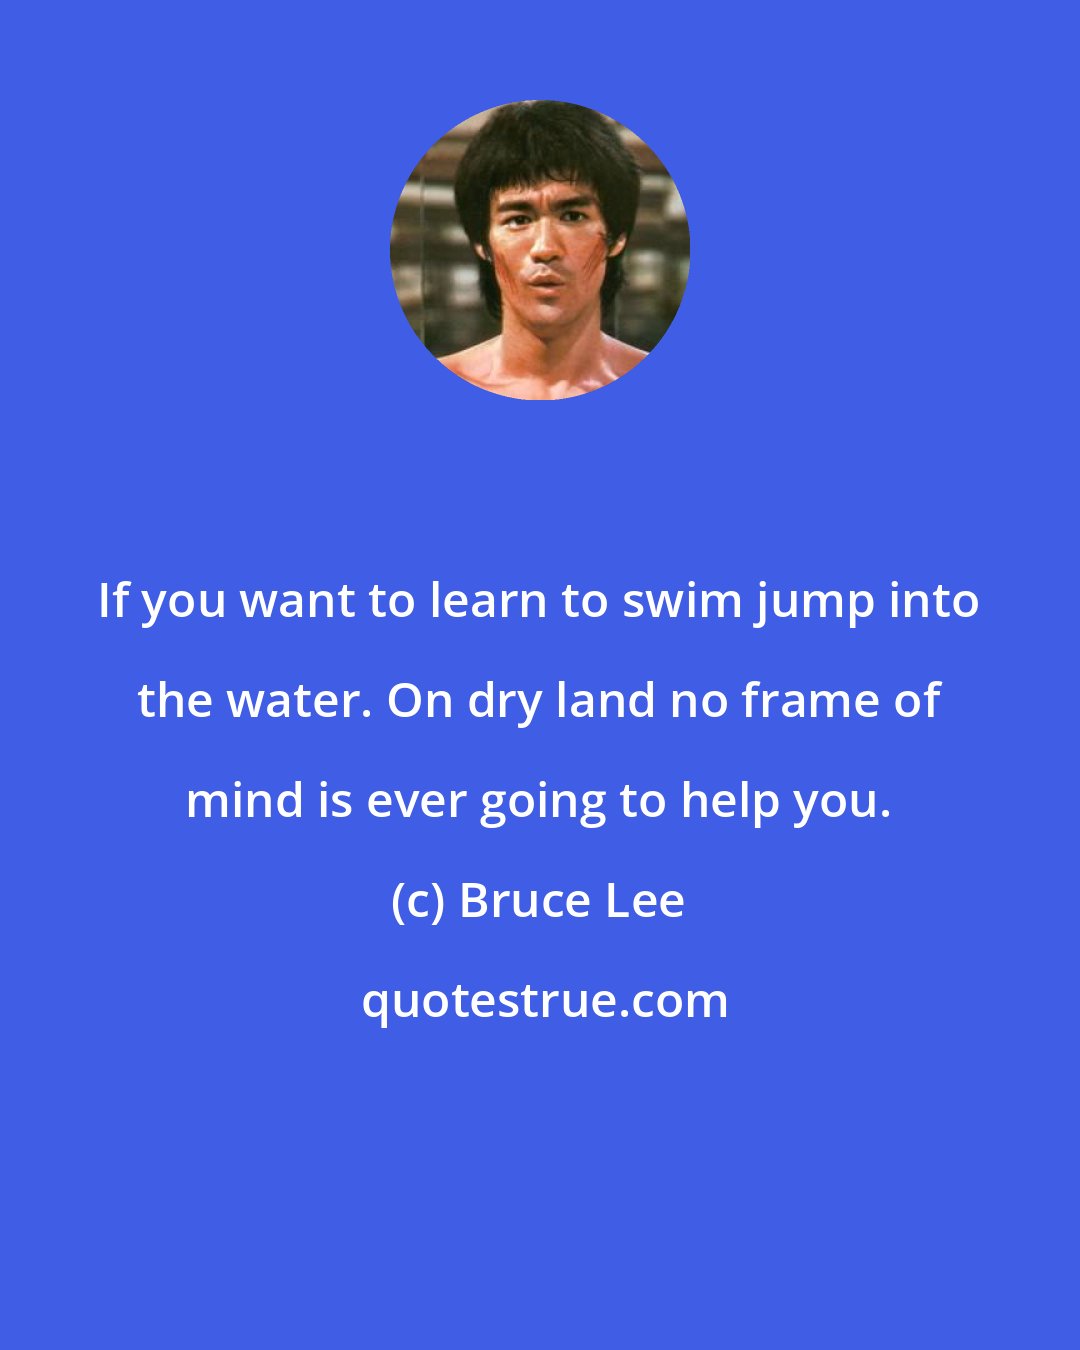 Bruce Lee: If you want to learn to swim jump into the water. On dry land no frame of mind is ever going to help you.